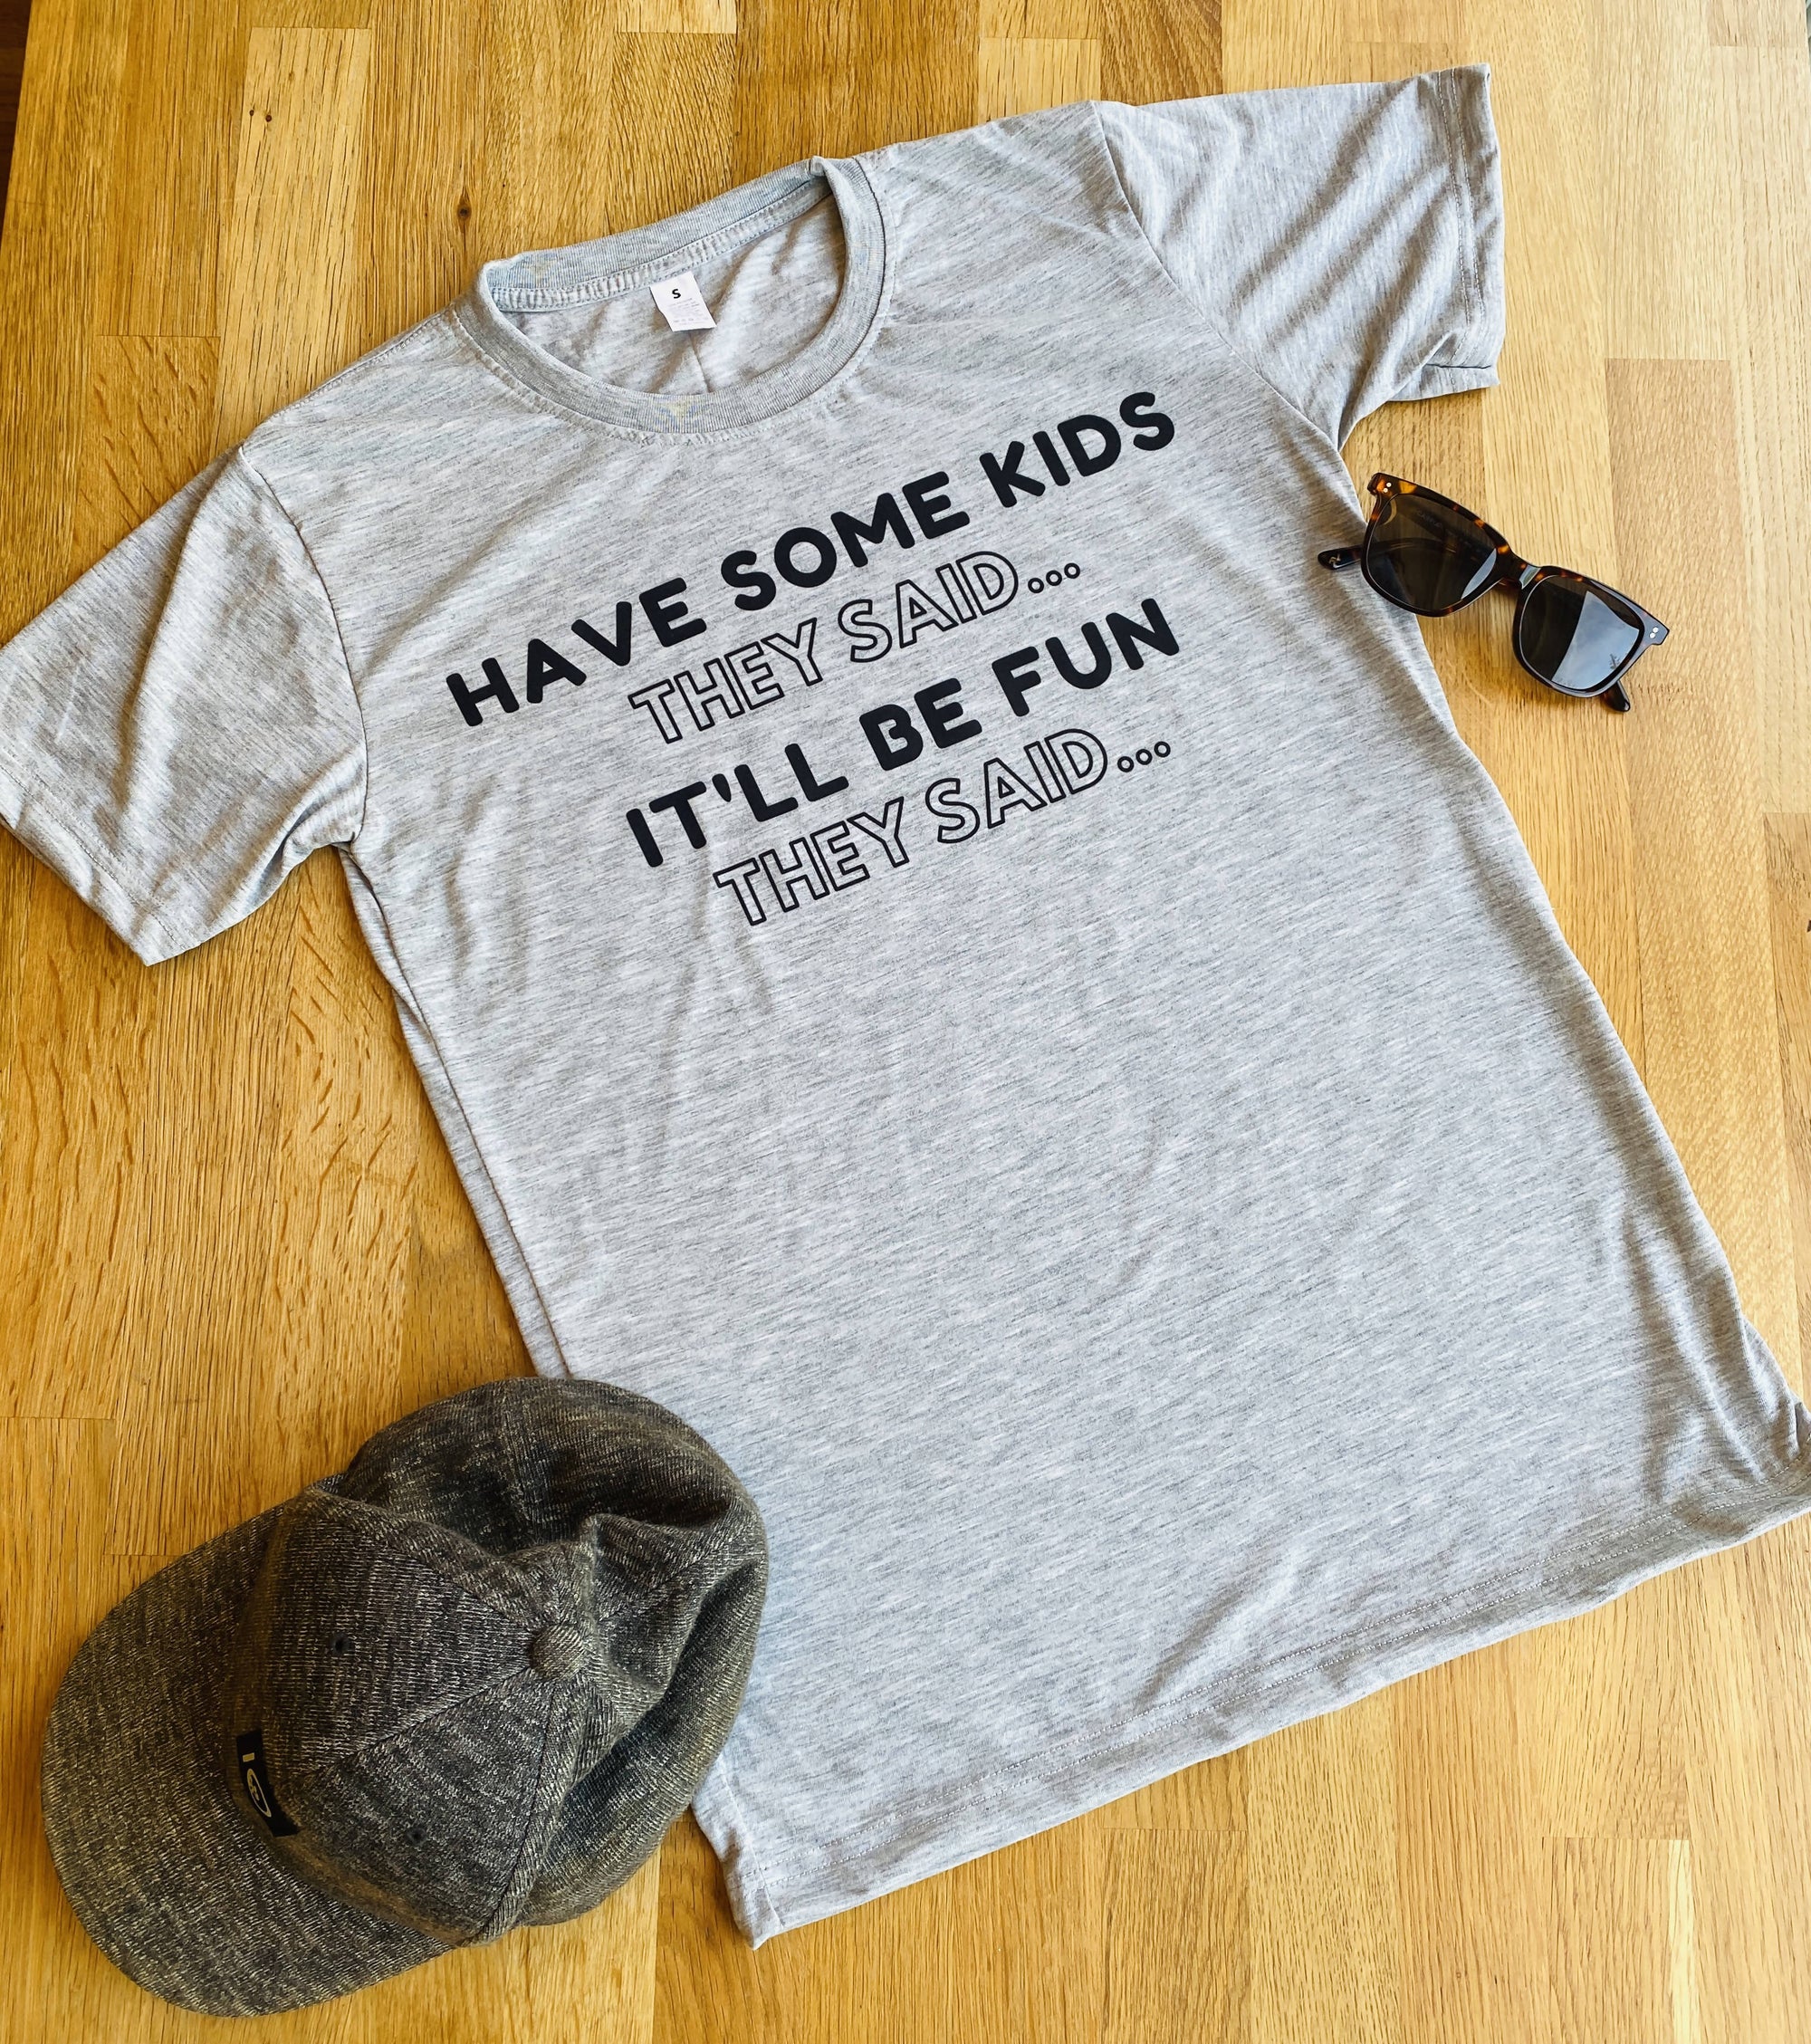 (4 COLORS) Unisex super soft tshirt - Have some Kids they said